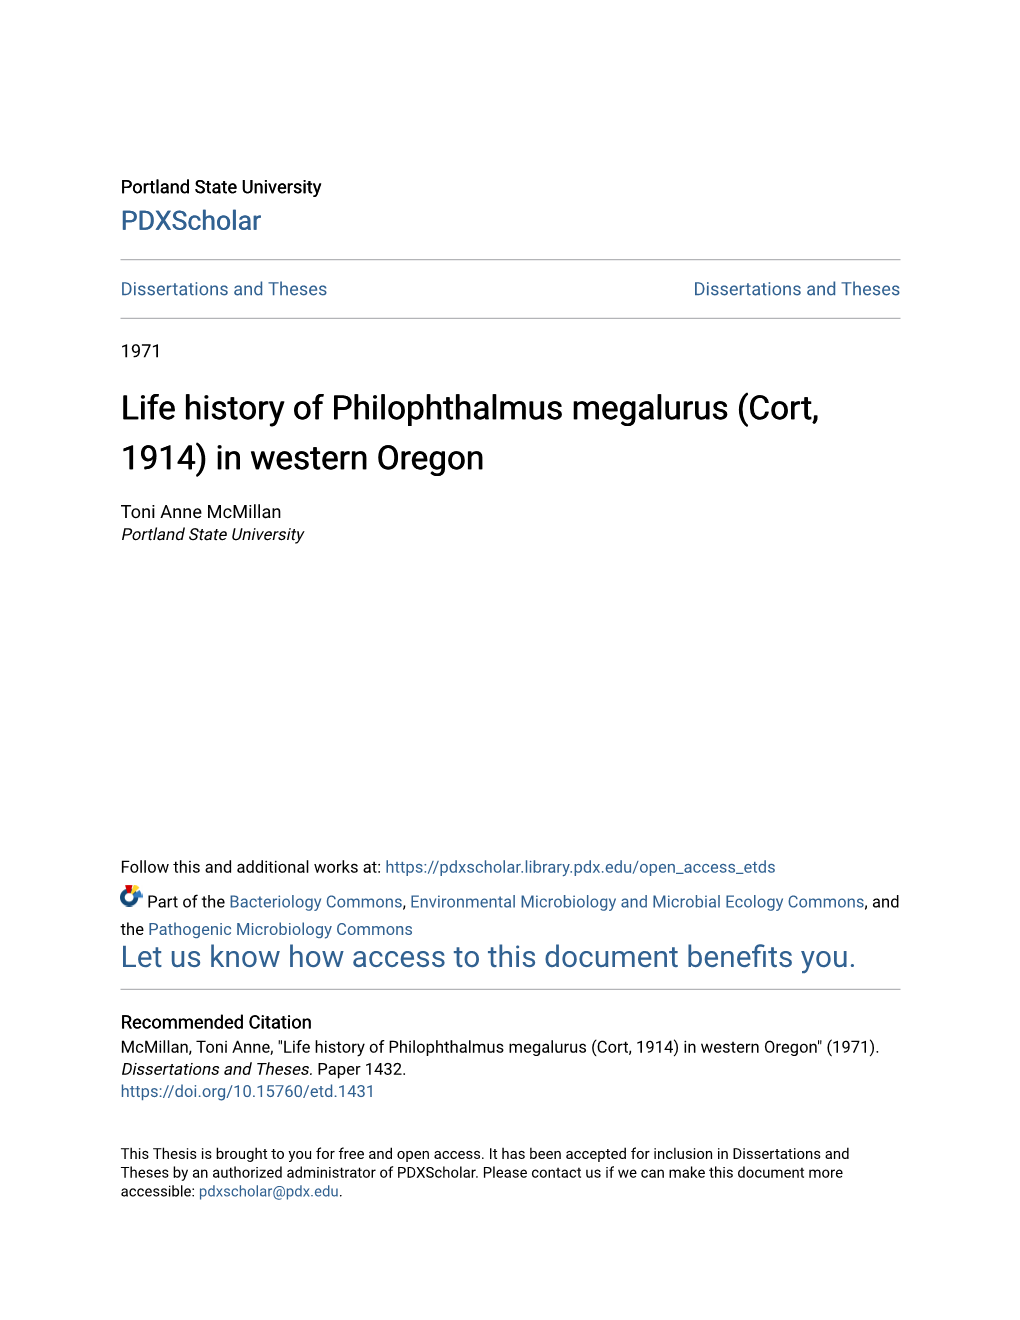 Life History of Philophthalmus Megalurus (Cort, 1914) in Western Oregon